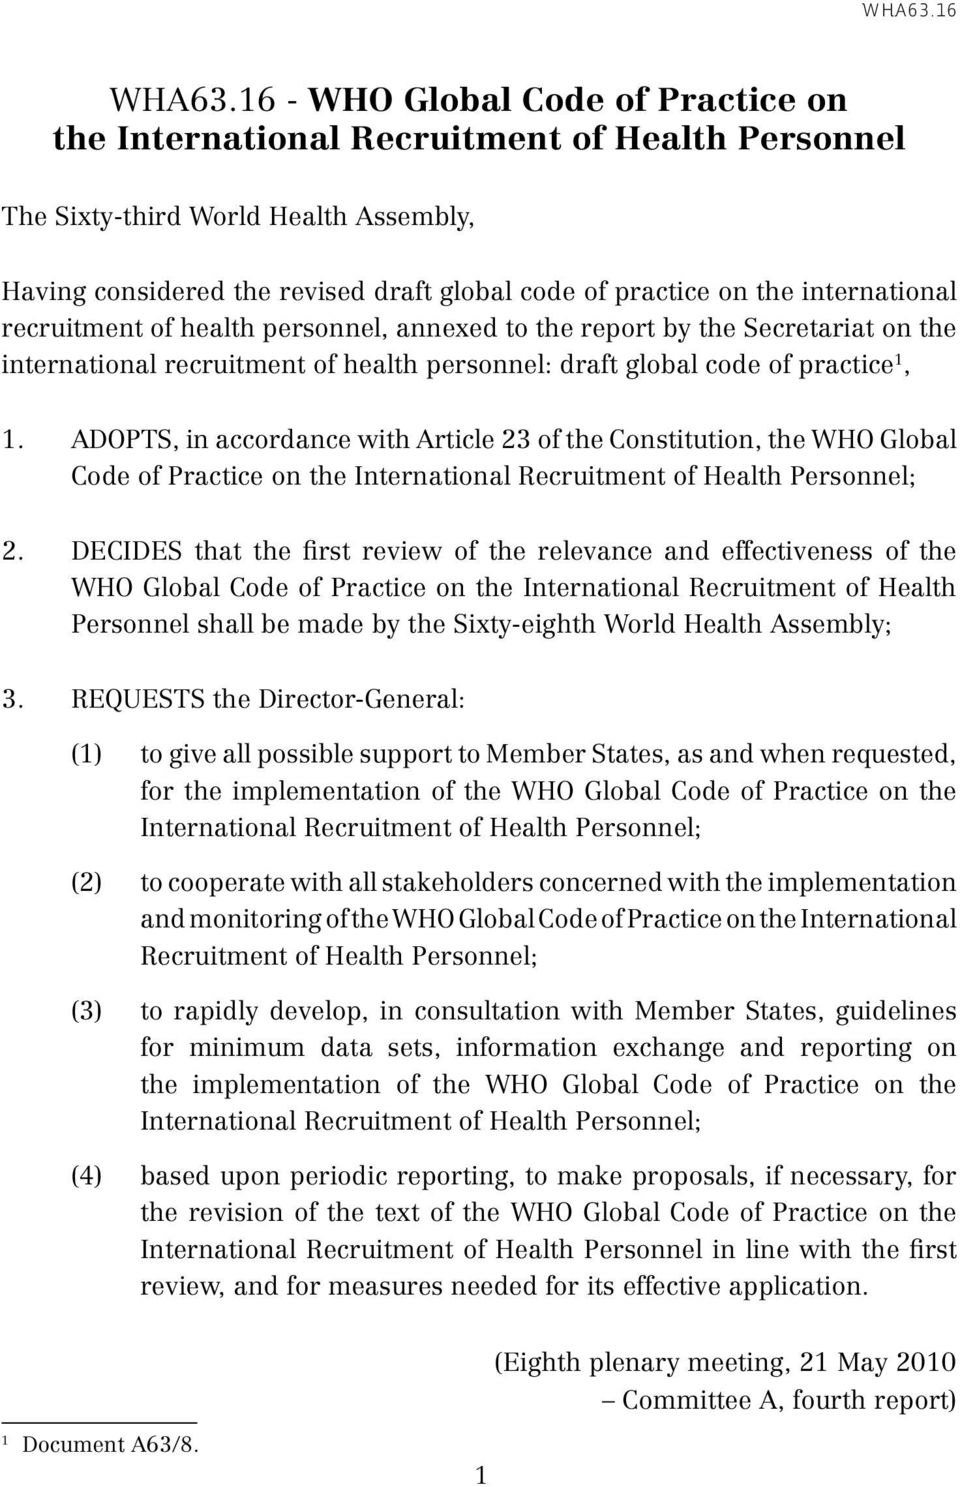 international recruitment of health personnel, annexed to the report by the Secretariat on the international recruitment of health personnel: draft global code of practice 1, 1.